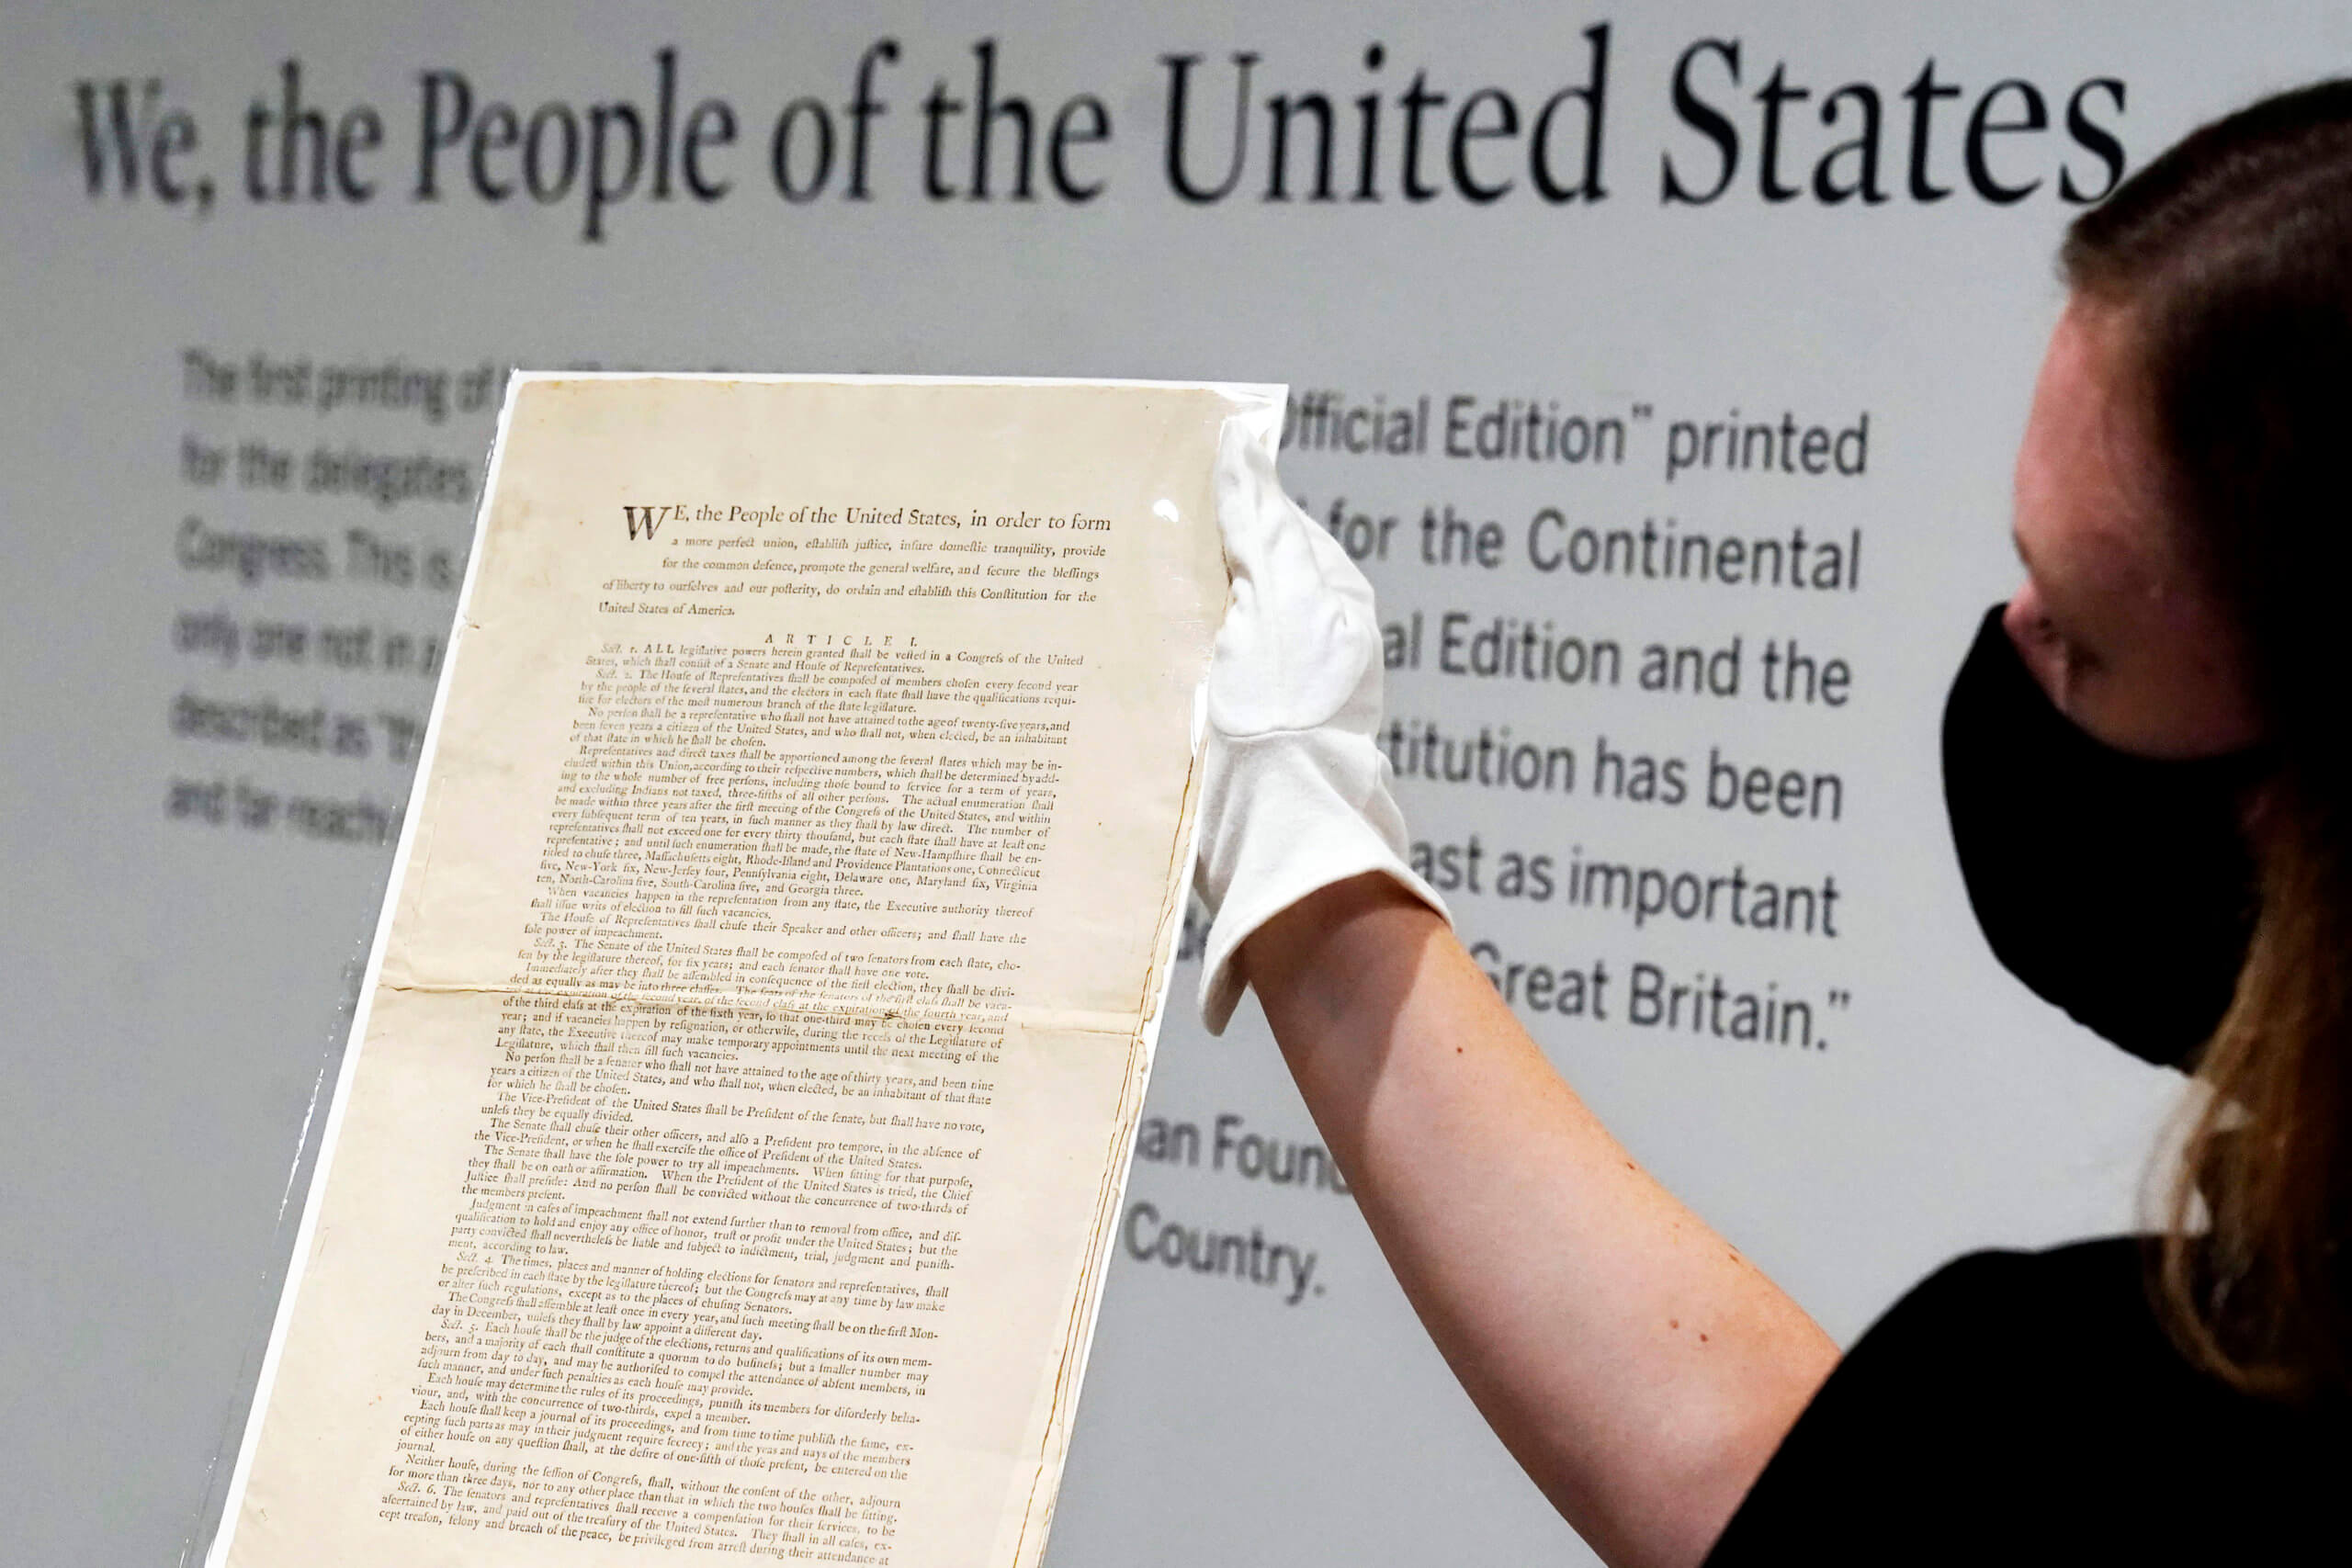 The original US Constitution text: A document that inspired the